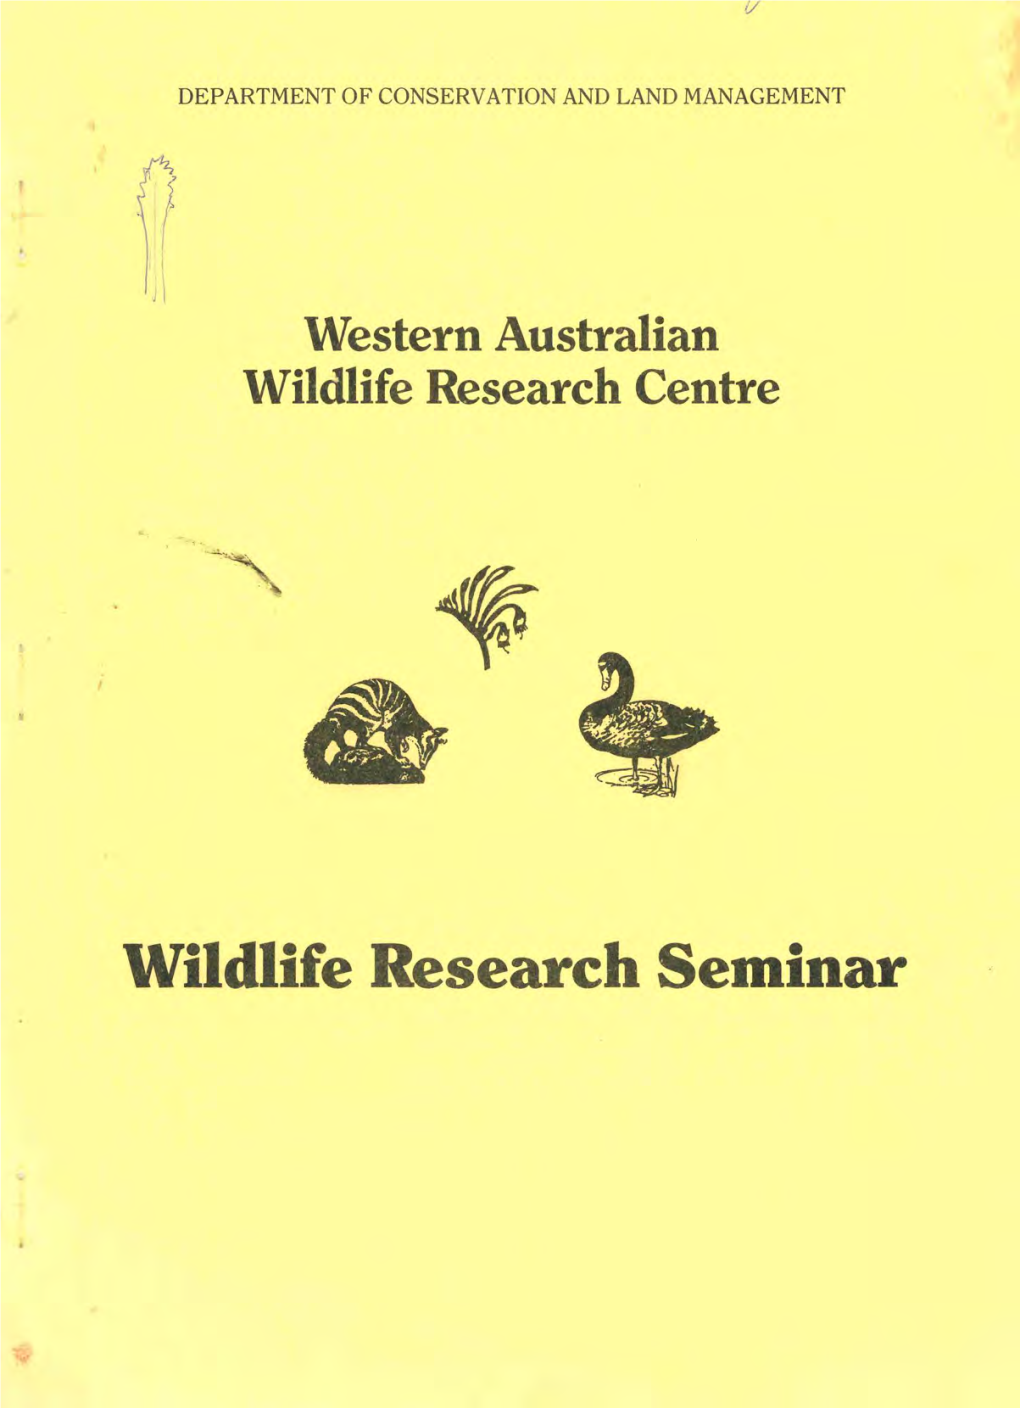 Wildlife Research Seminar DEPARTMENT of CONSERVATION and LAND MANAGEMENT